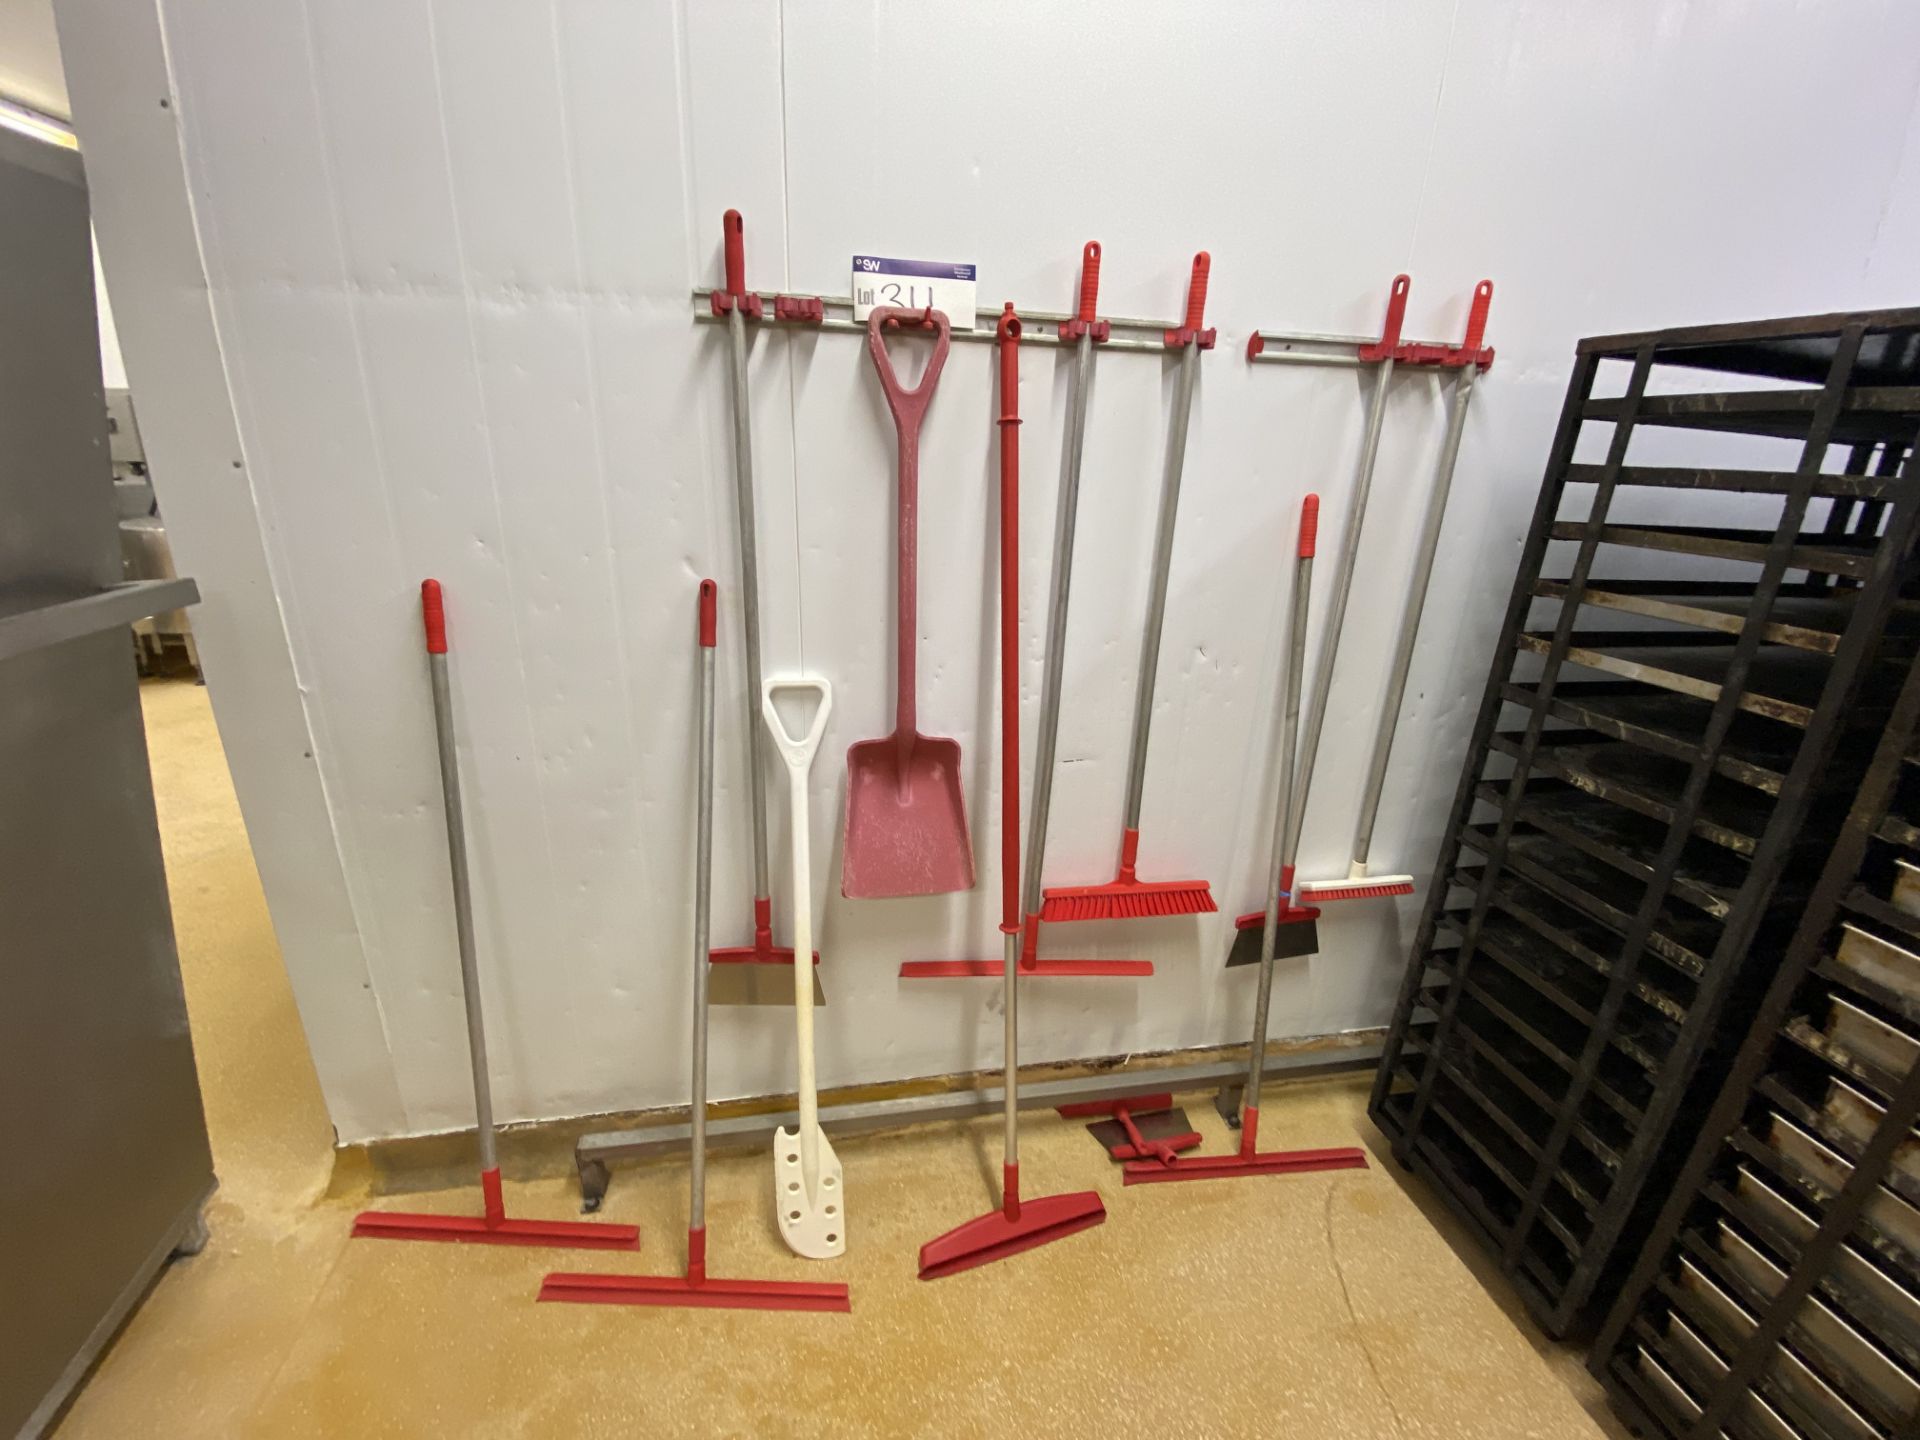 Assorted Cleaning Tools, as set out against wall and on rackPlease read the following important